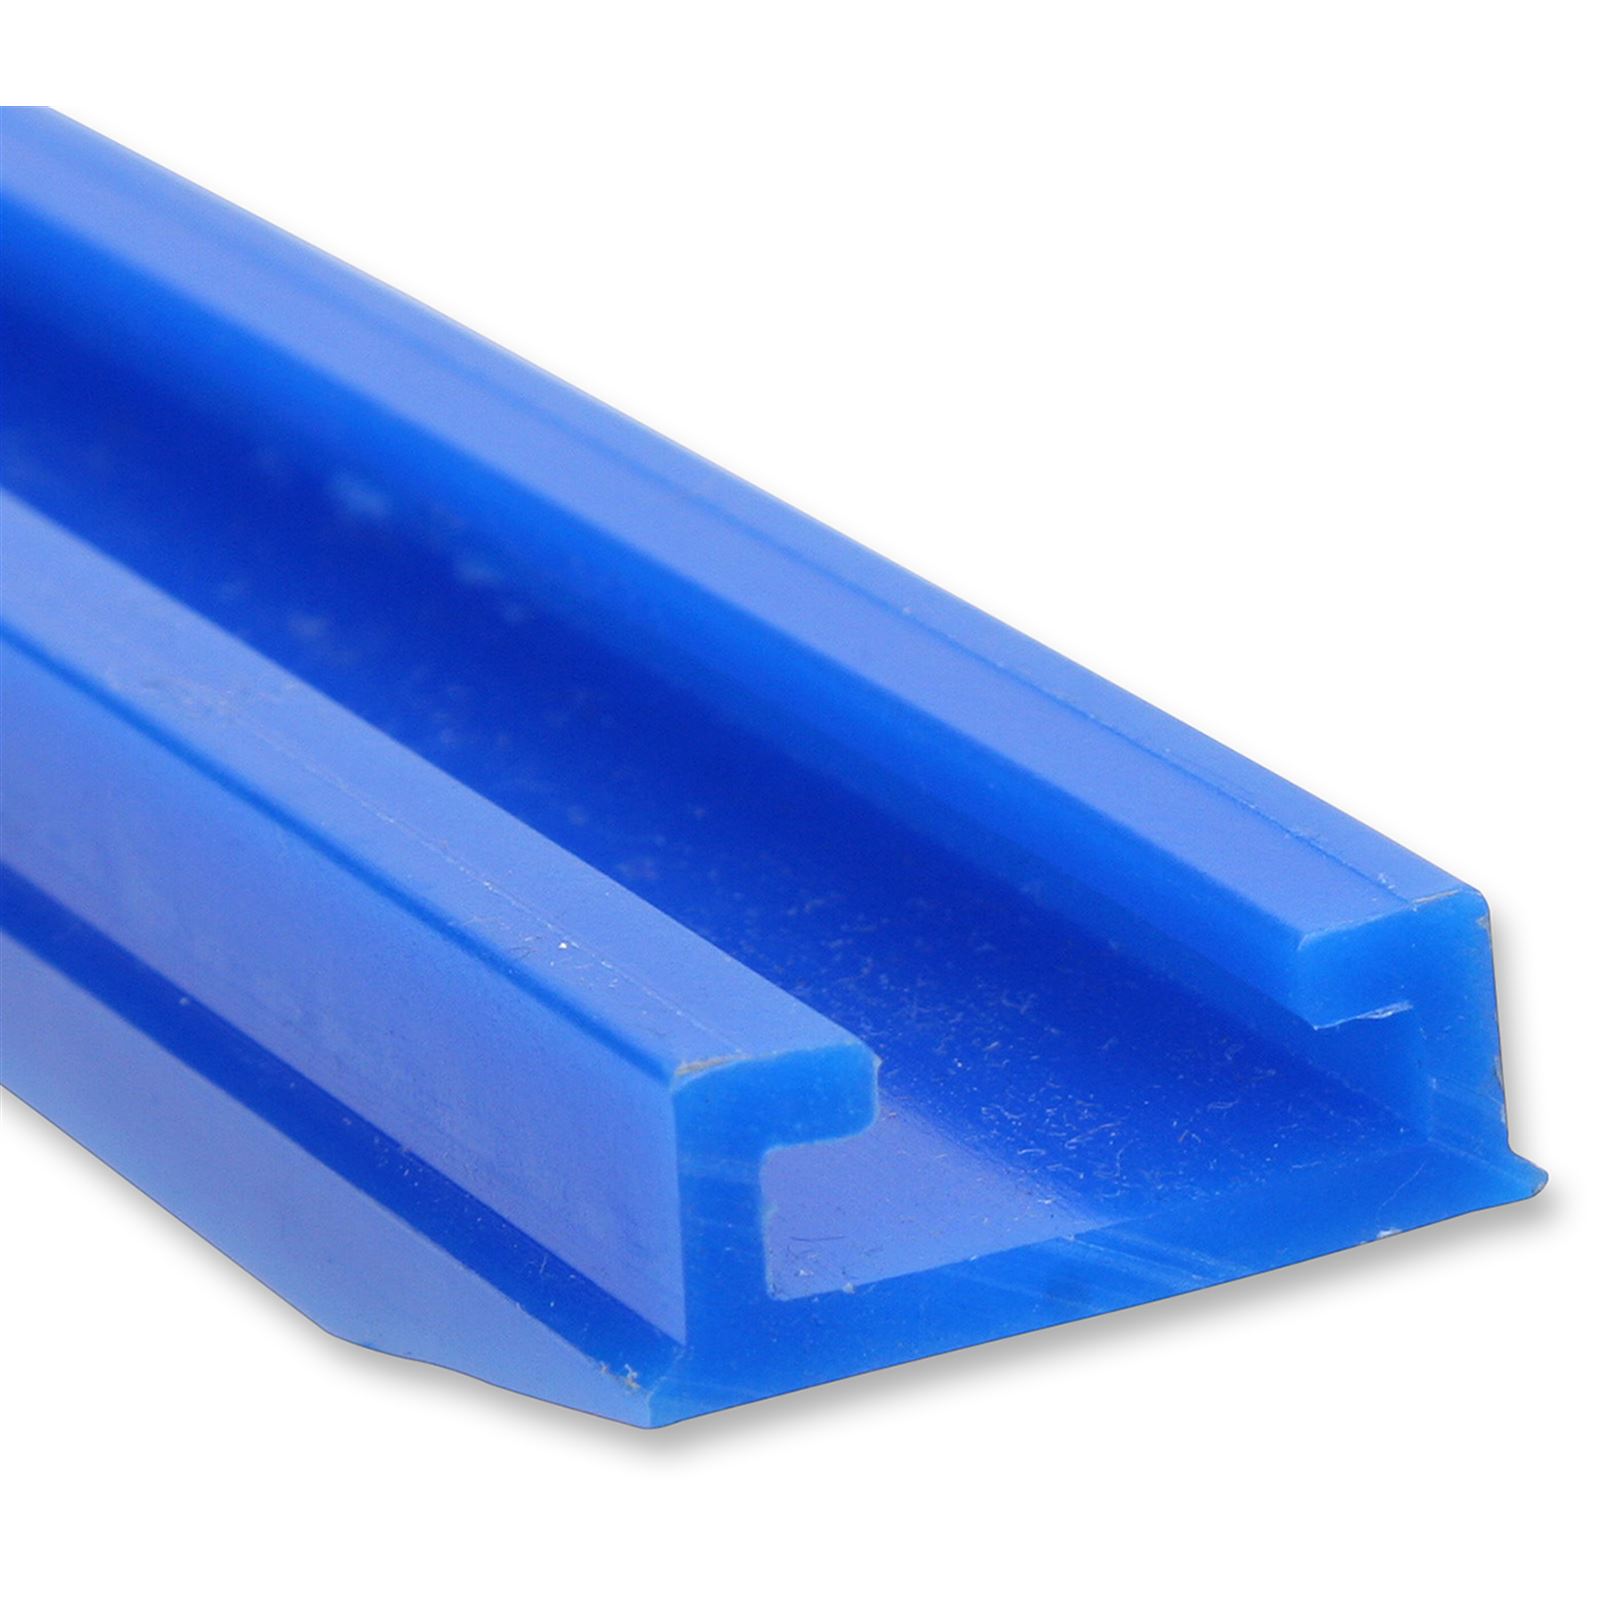 Garland Blue Replacement Slide - UHMW - Profile 25 - Length 56.89" - for Yamaha